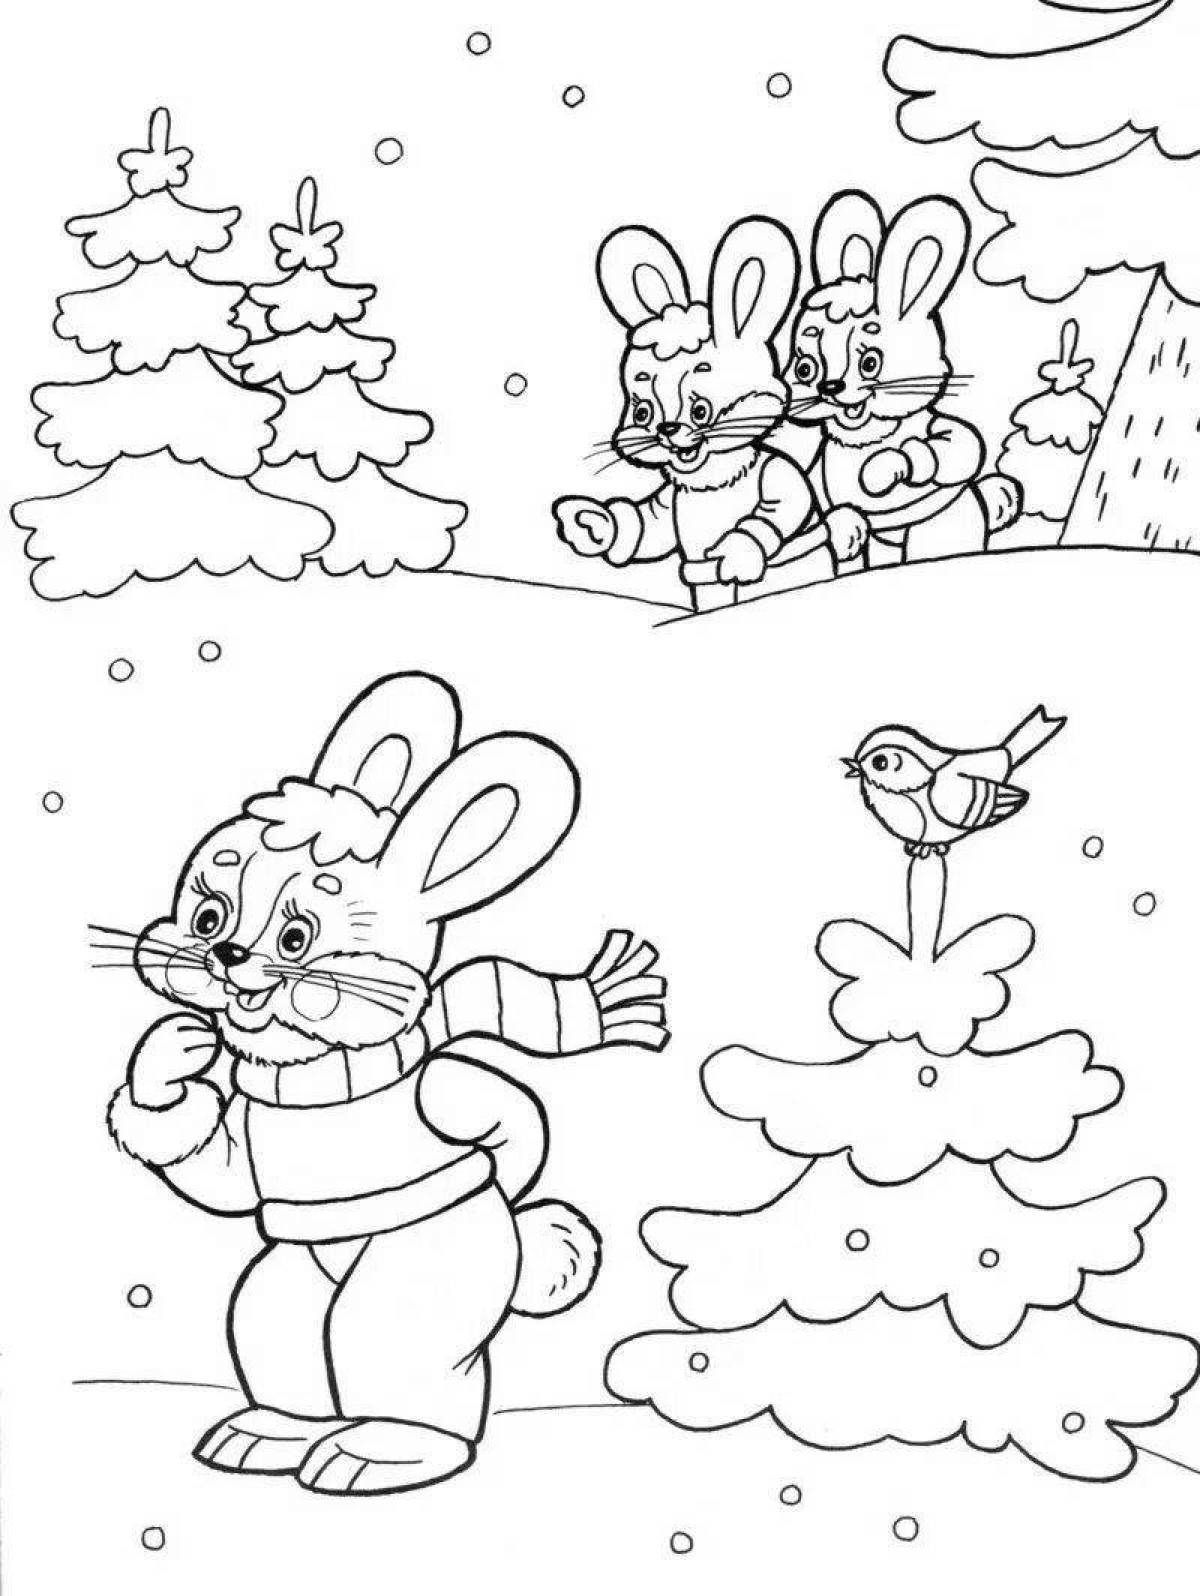 Playful coloring book for children 2-3 years old for kindergarten winter